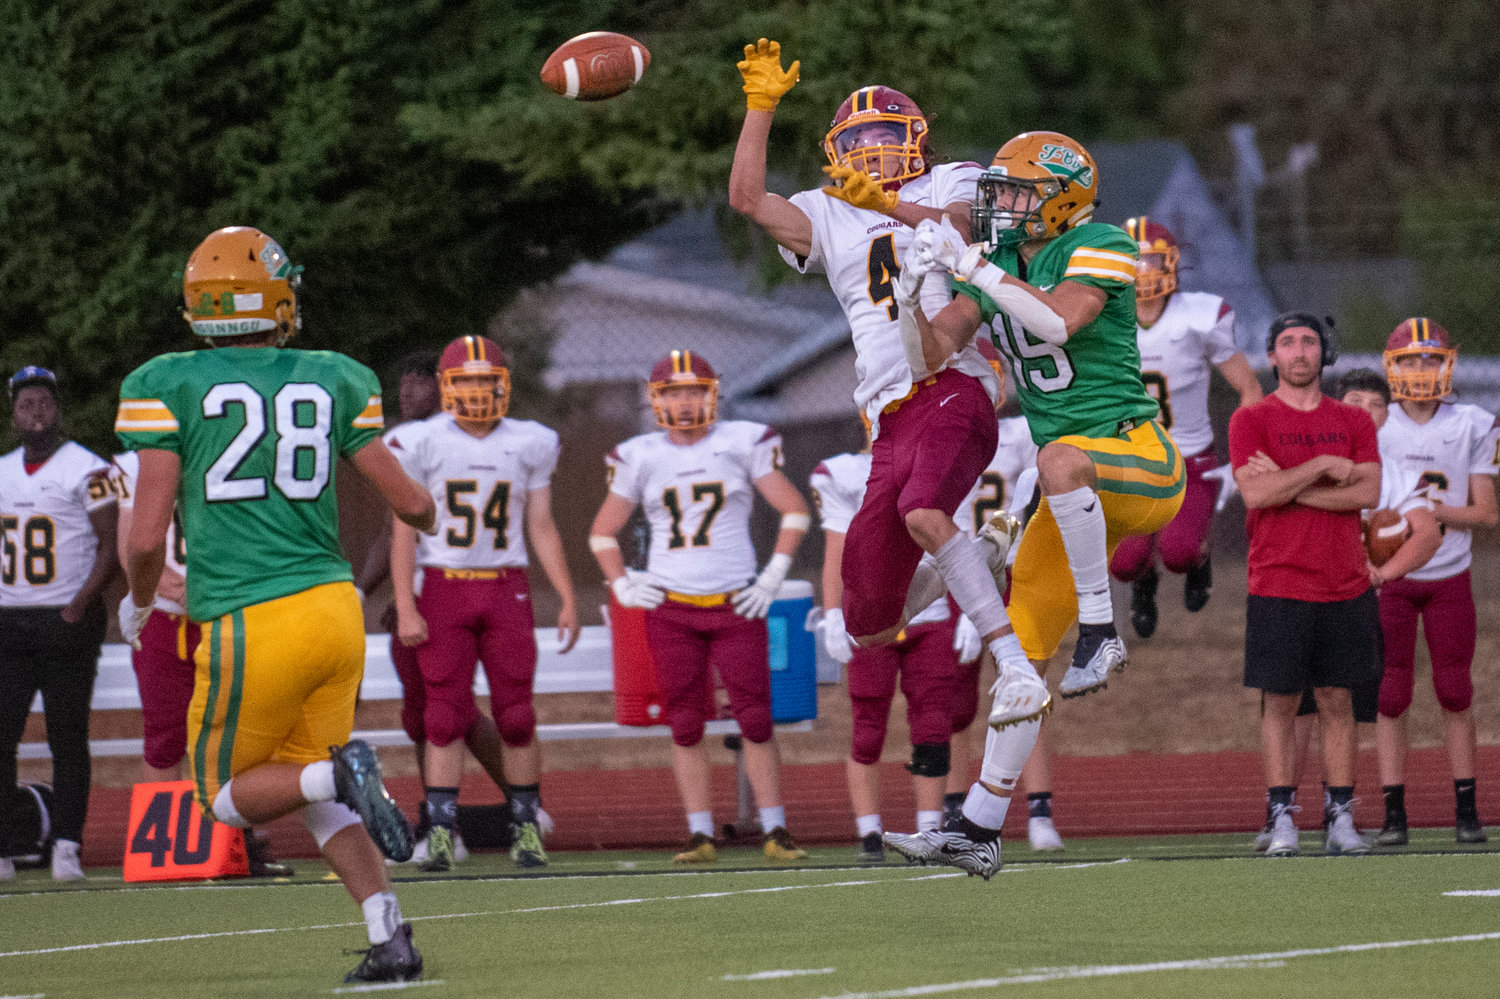 Tumwater's Ashton Paine (15) breaks up a pass intended for Capital wideout Deonte Burns (4) on Thursday, leading to Ryan Orr's (28) interception.